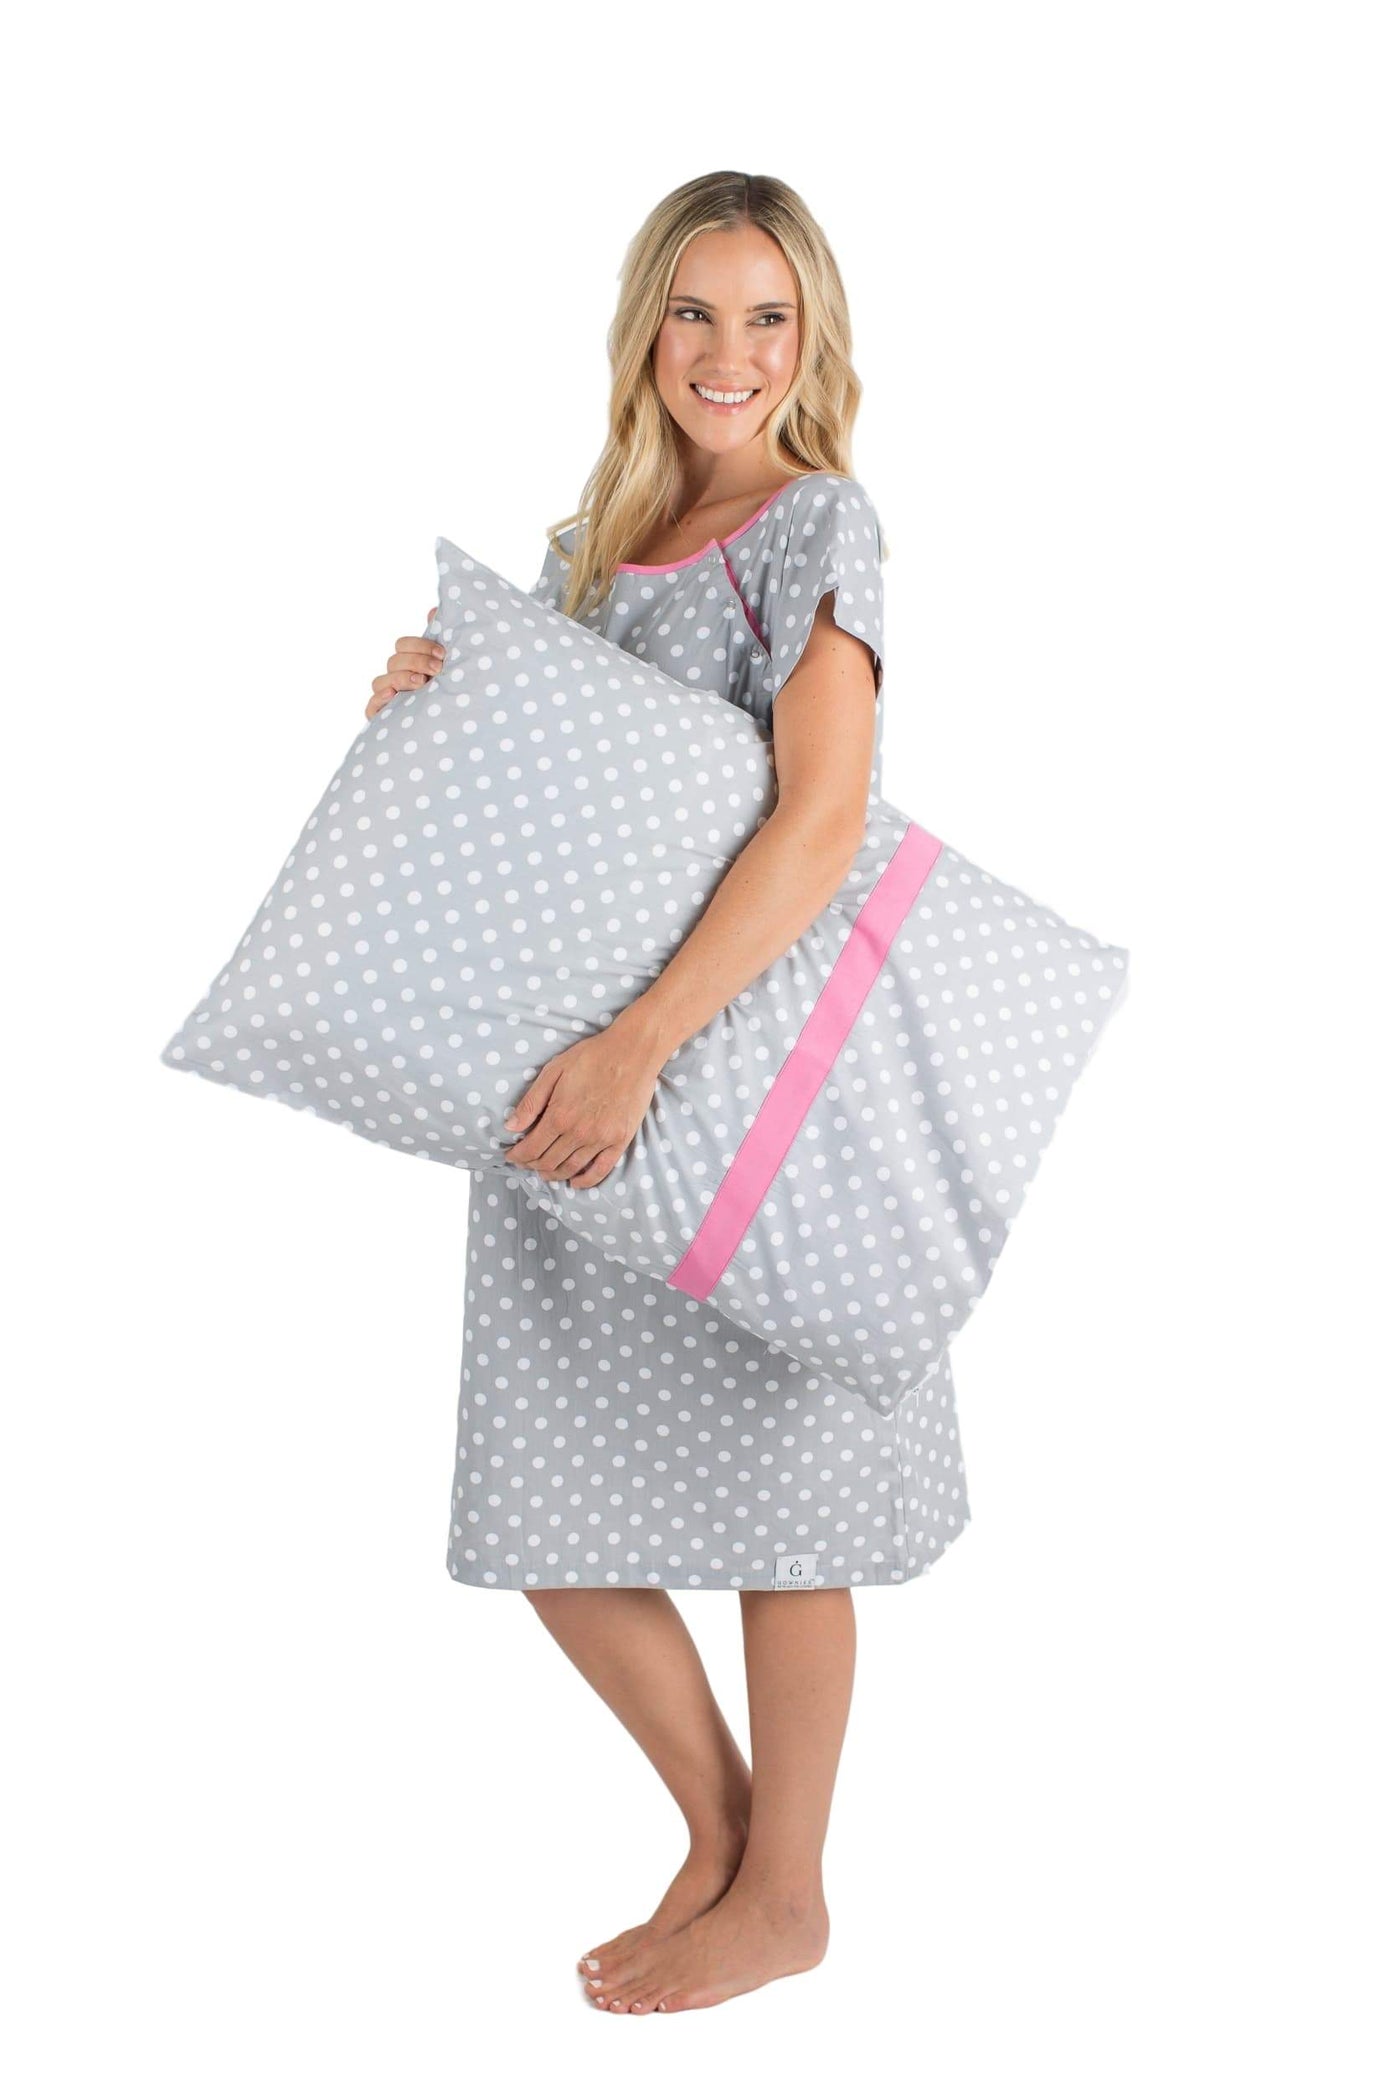 Lisa Hospital Patient Gownie & Matching Pillowcase Set